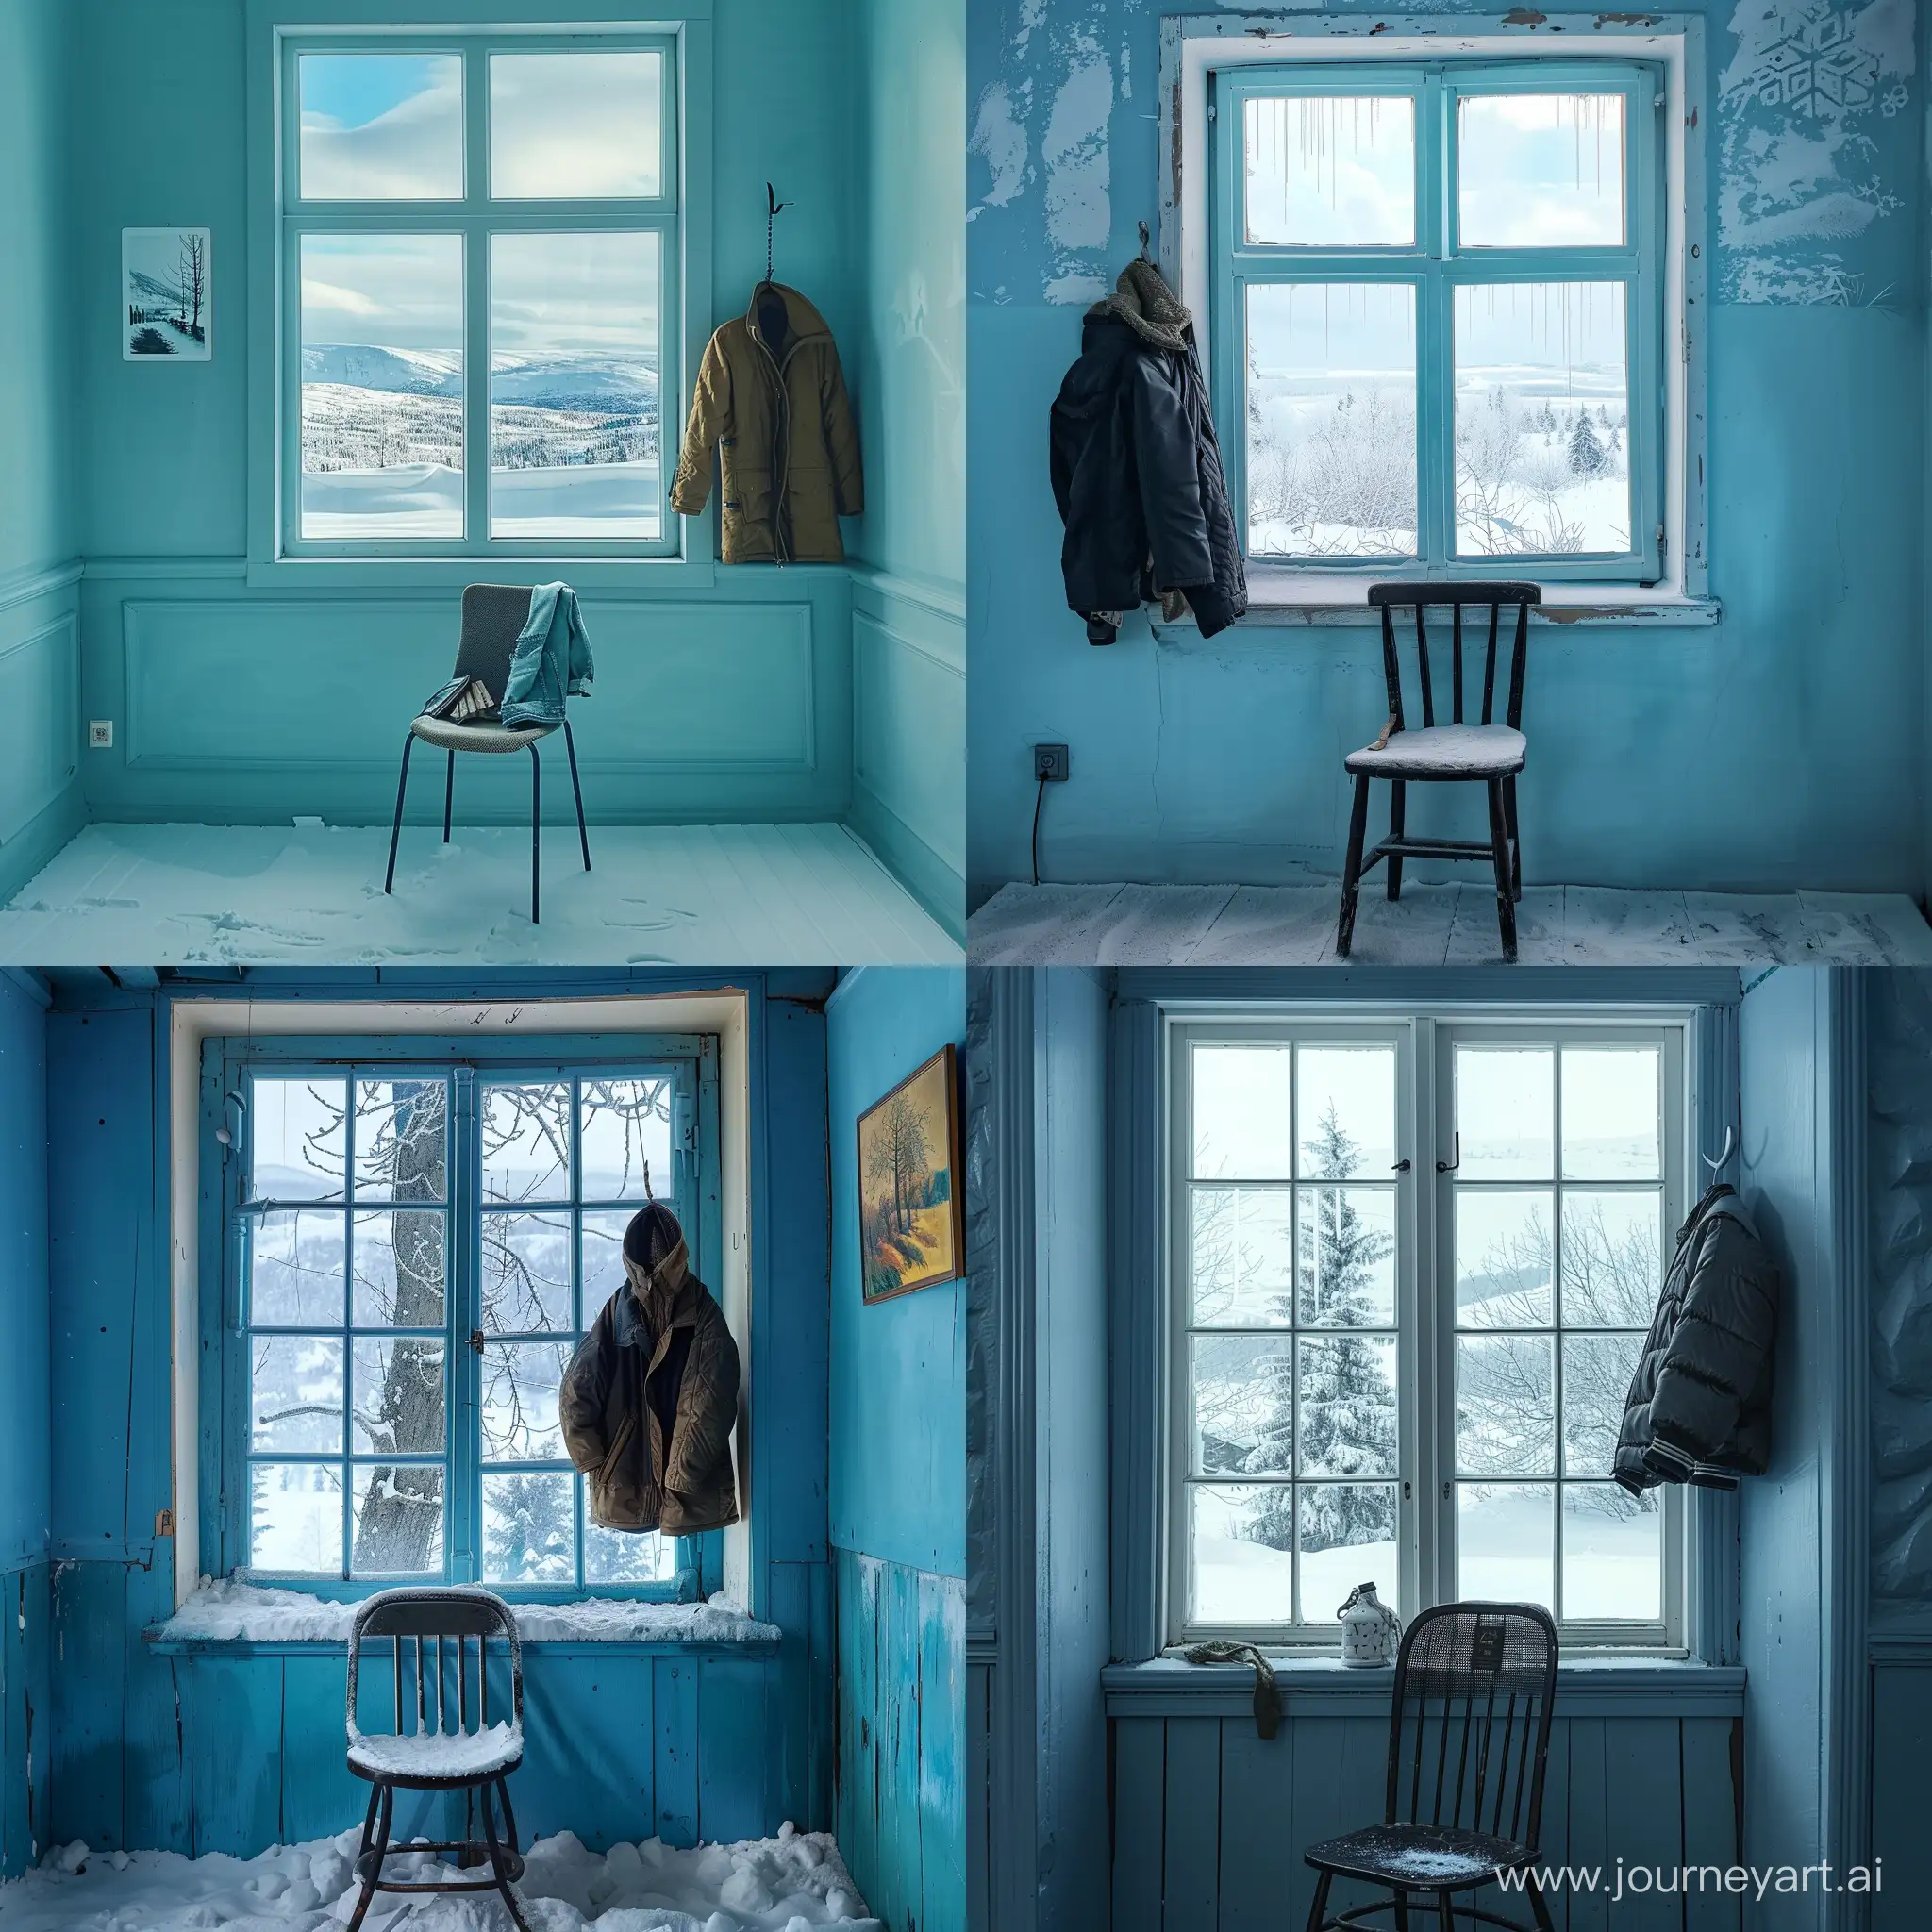 Cozy-Lofi-Blue-Room-with-Snowy-Landscape-View-and-Hanging-Jacket